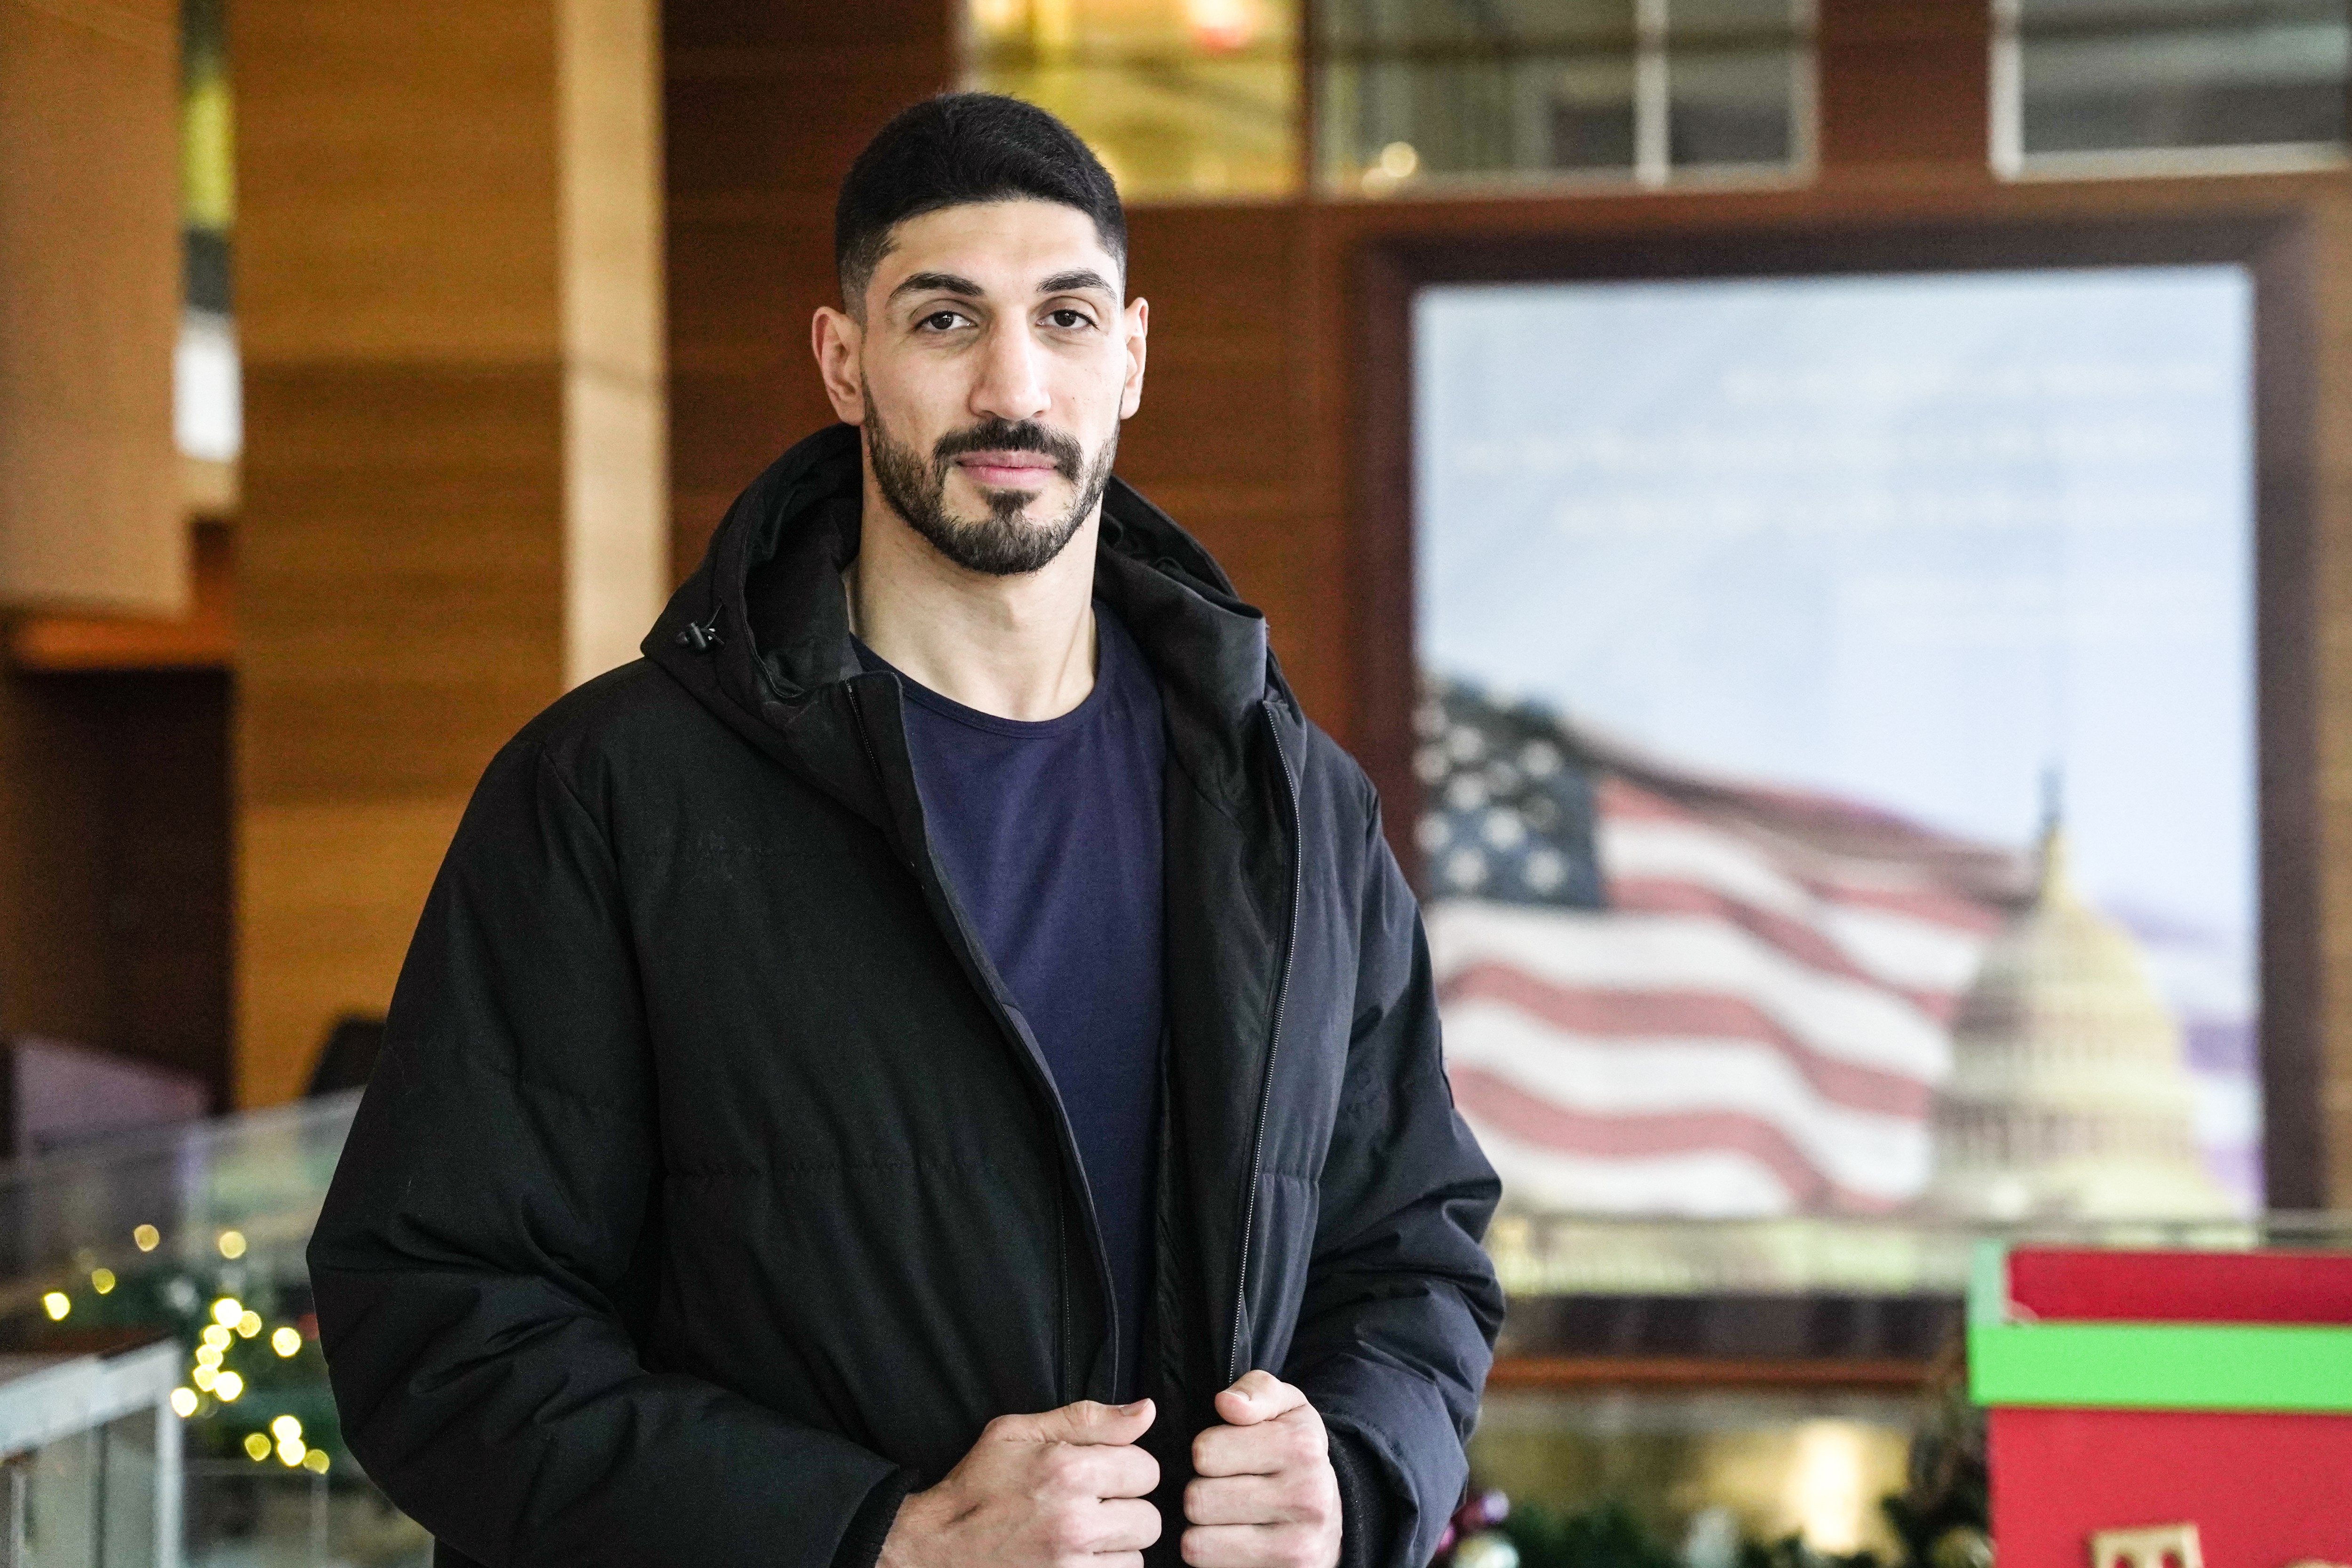 Enes Kanter: Why I Stand Up for Freedom Around the World